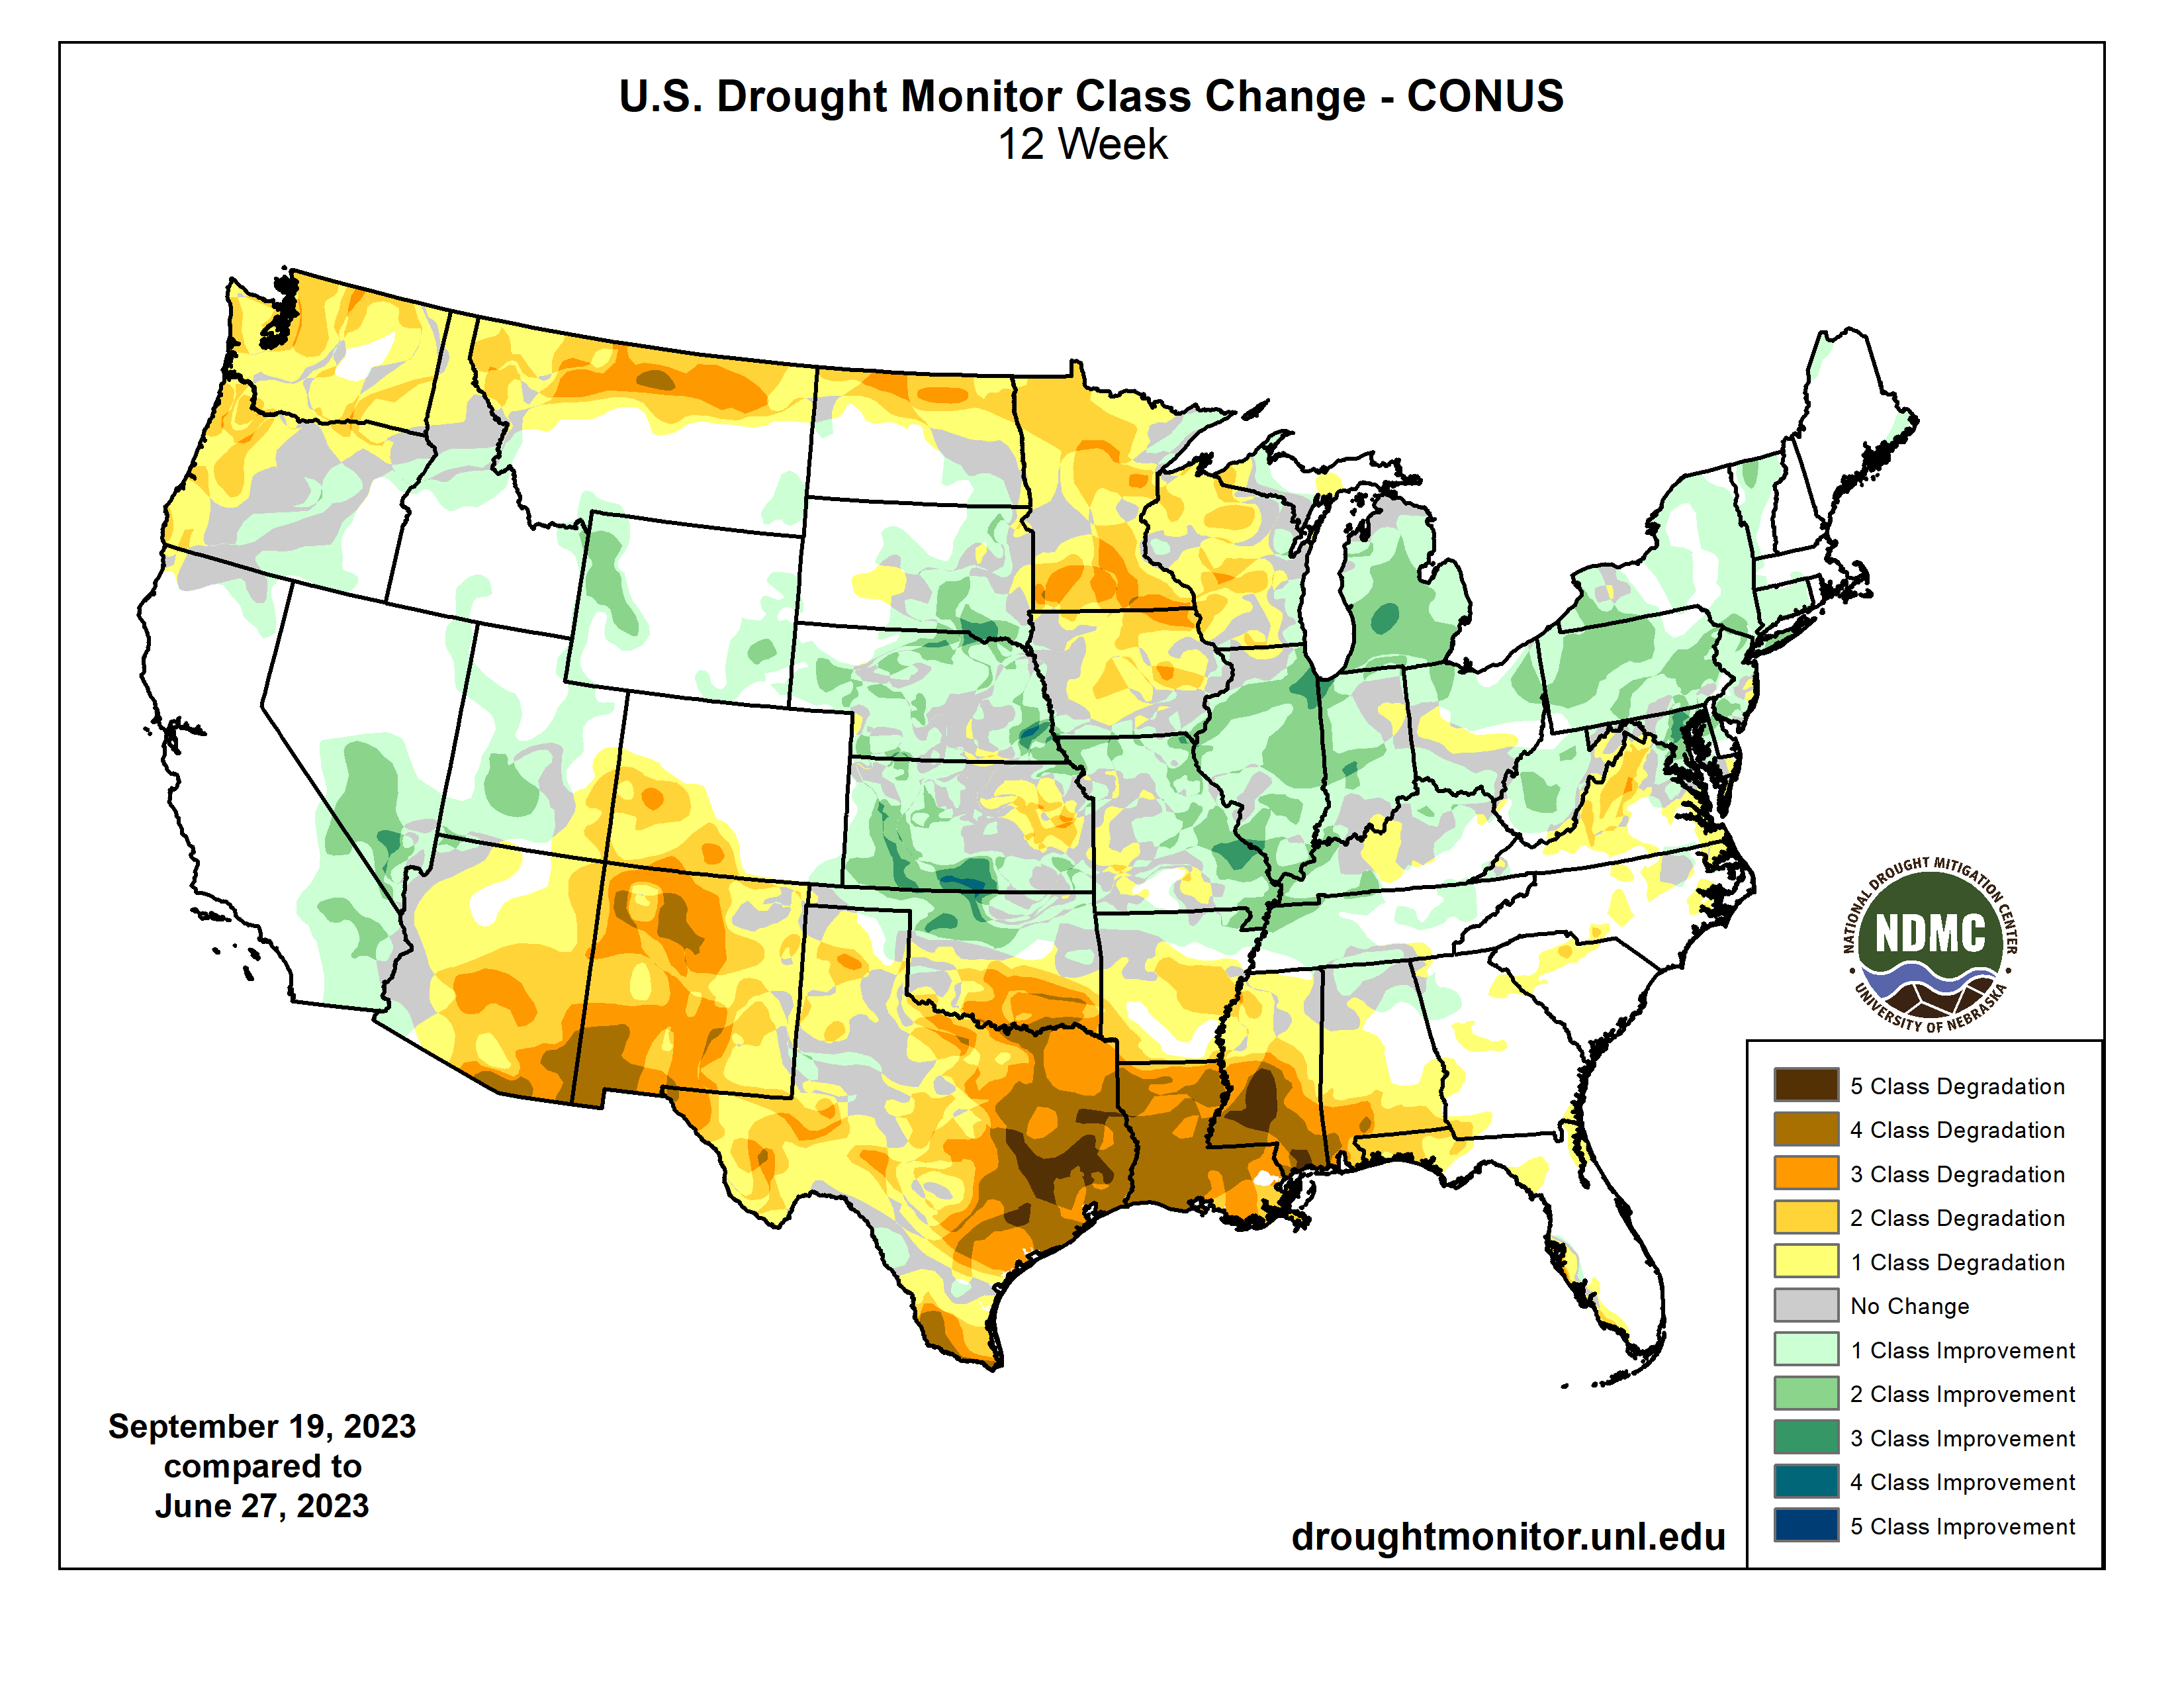 This map shows the changes to the U.S. Drought Monitor for 12 weeks for September 19, 2023.